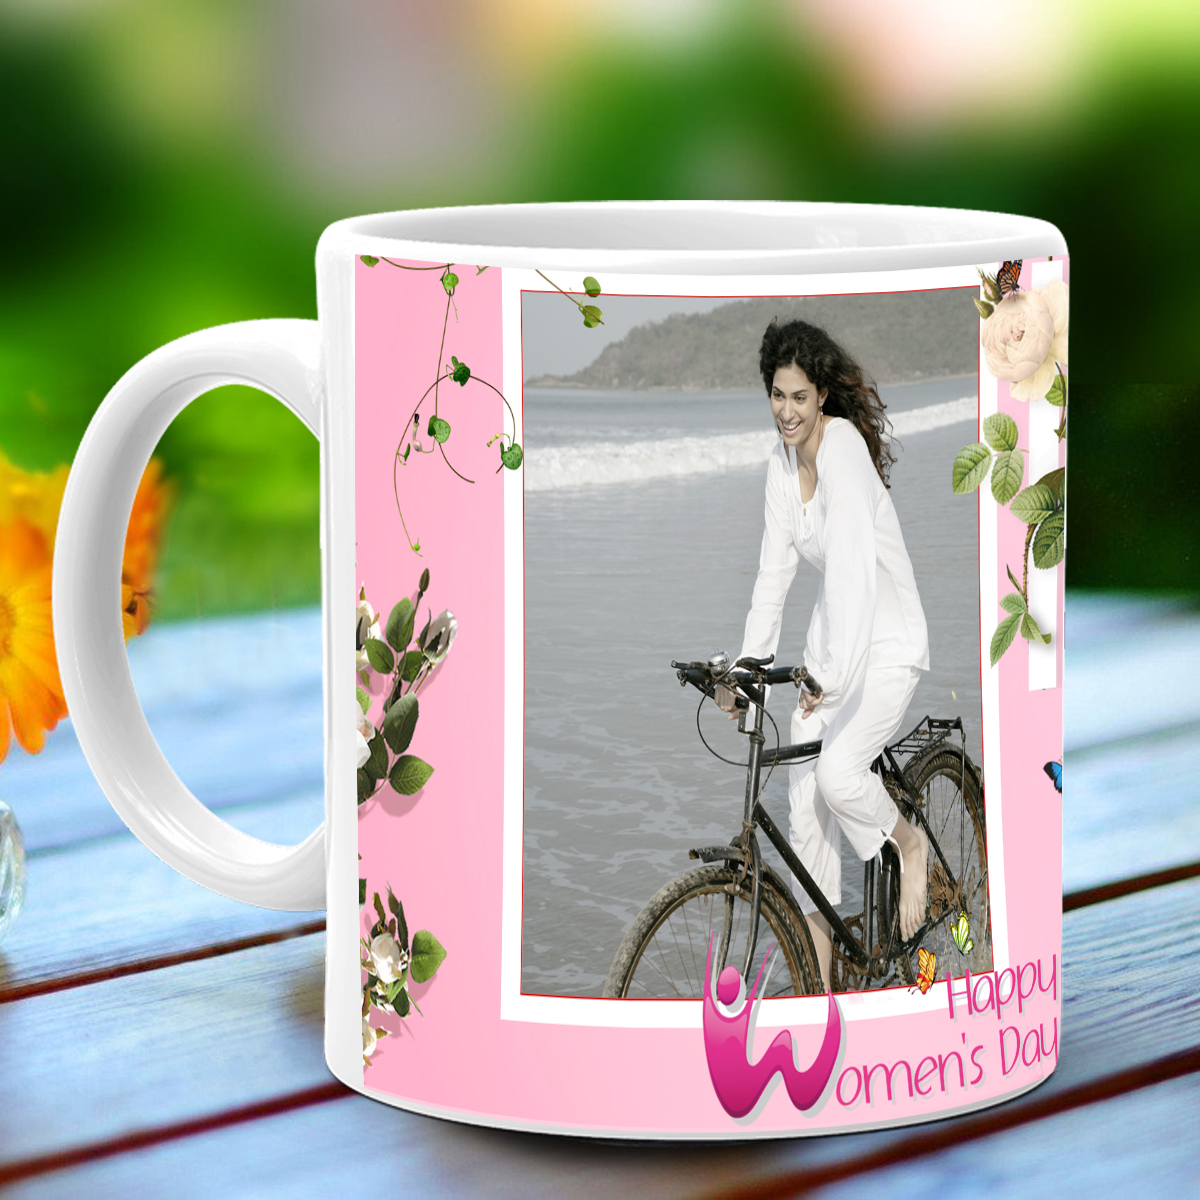 Womens Day Gifts For Wife @ Rs.199 | Send Gift To Wife on Womens Day - Winni